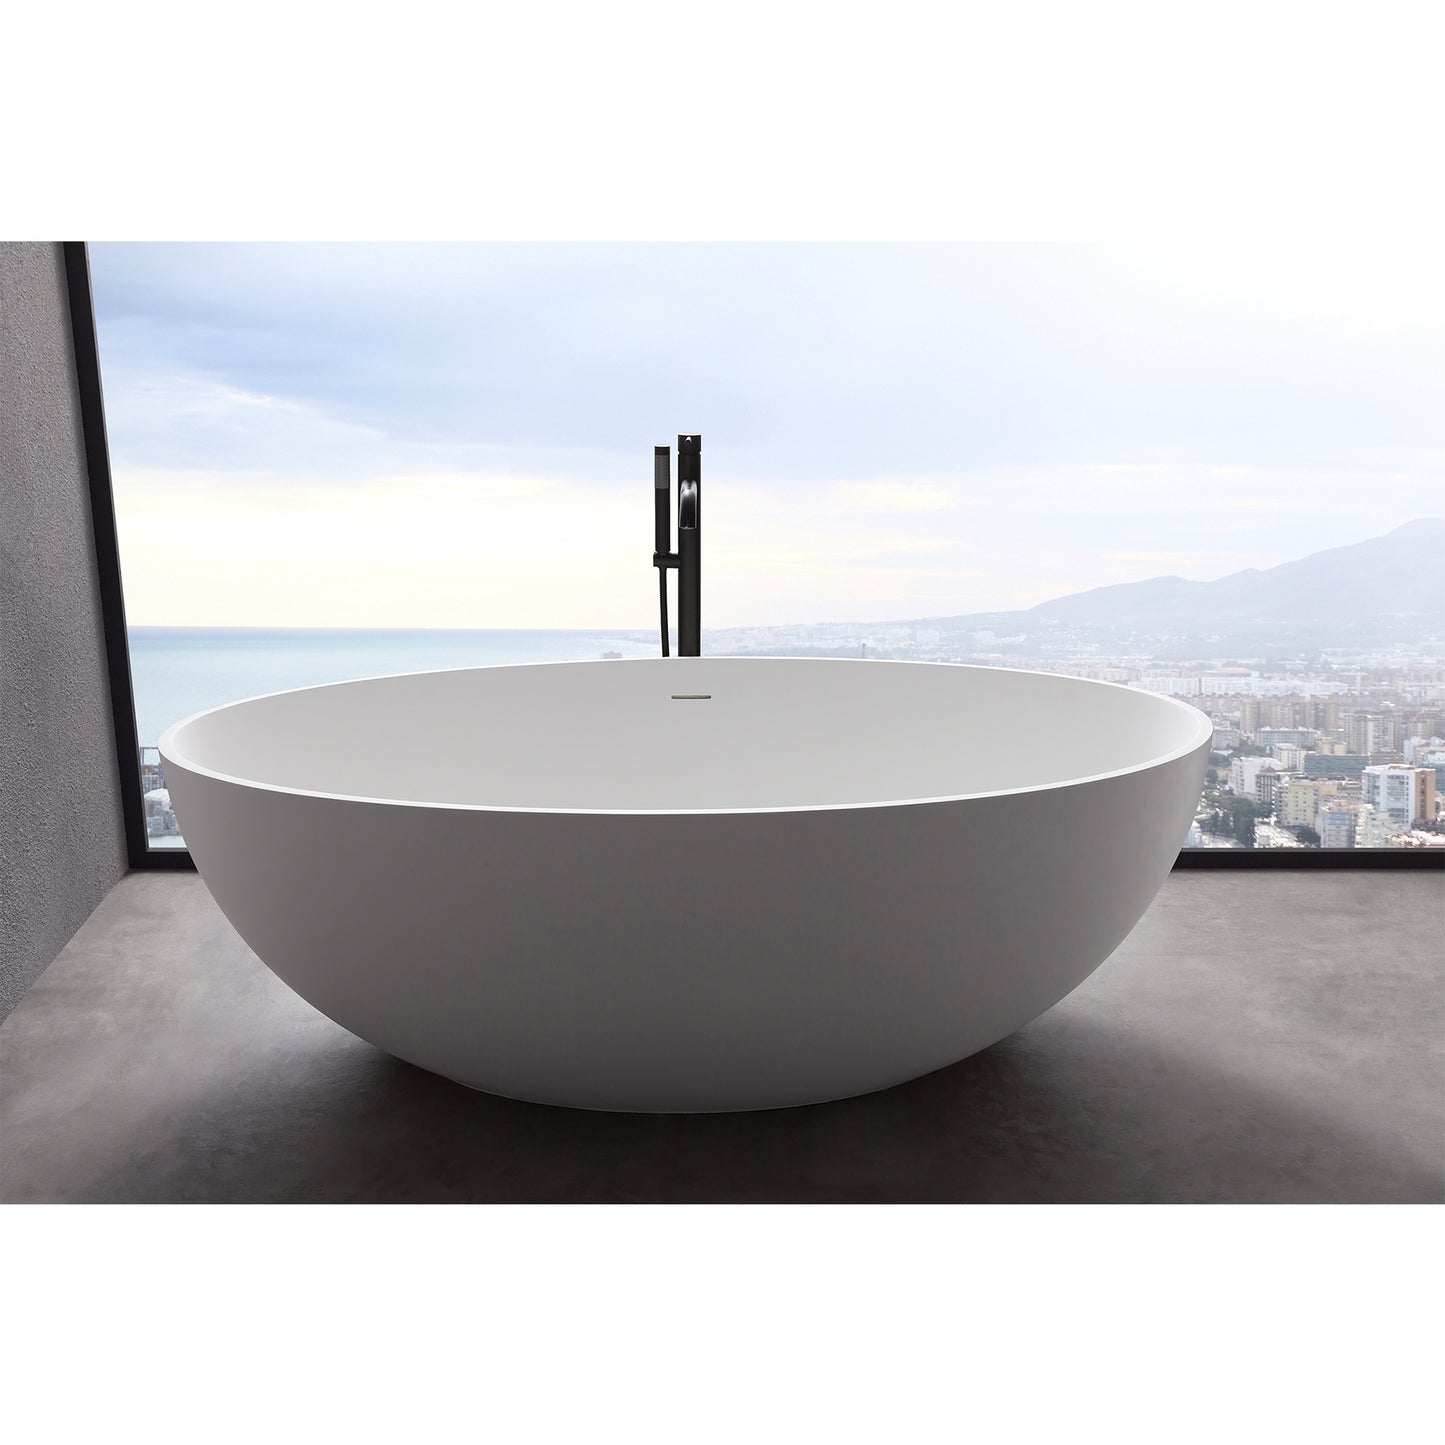 1700mm artificial stone solid surface freestanding bathroom adult bathtub   40 inch extra wide